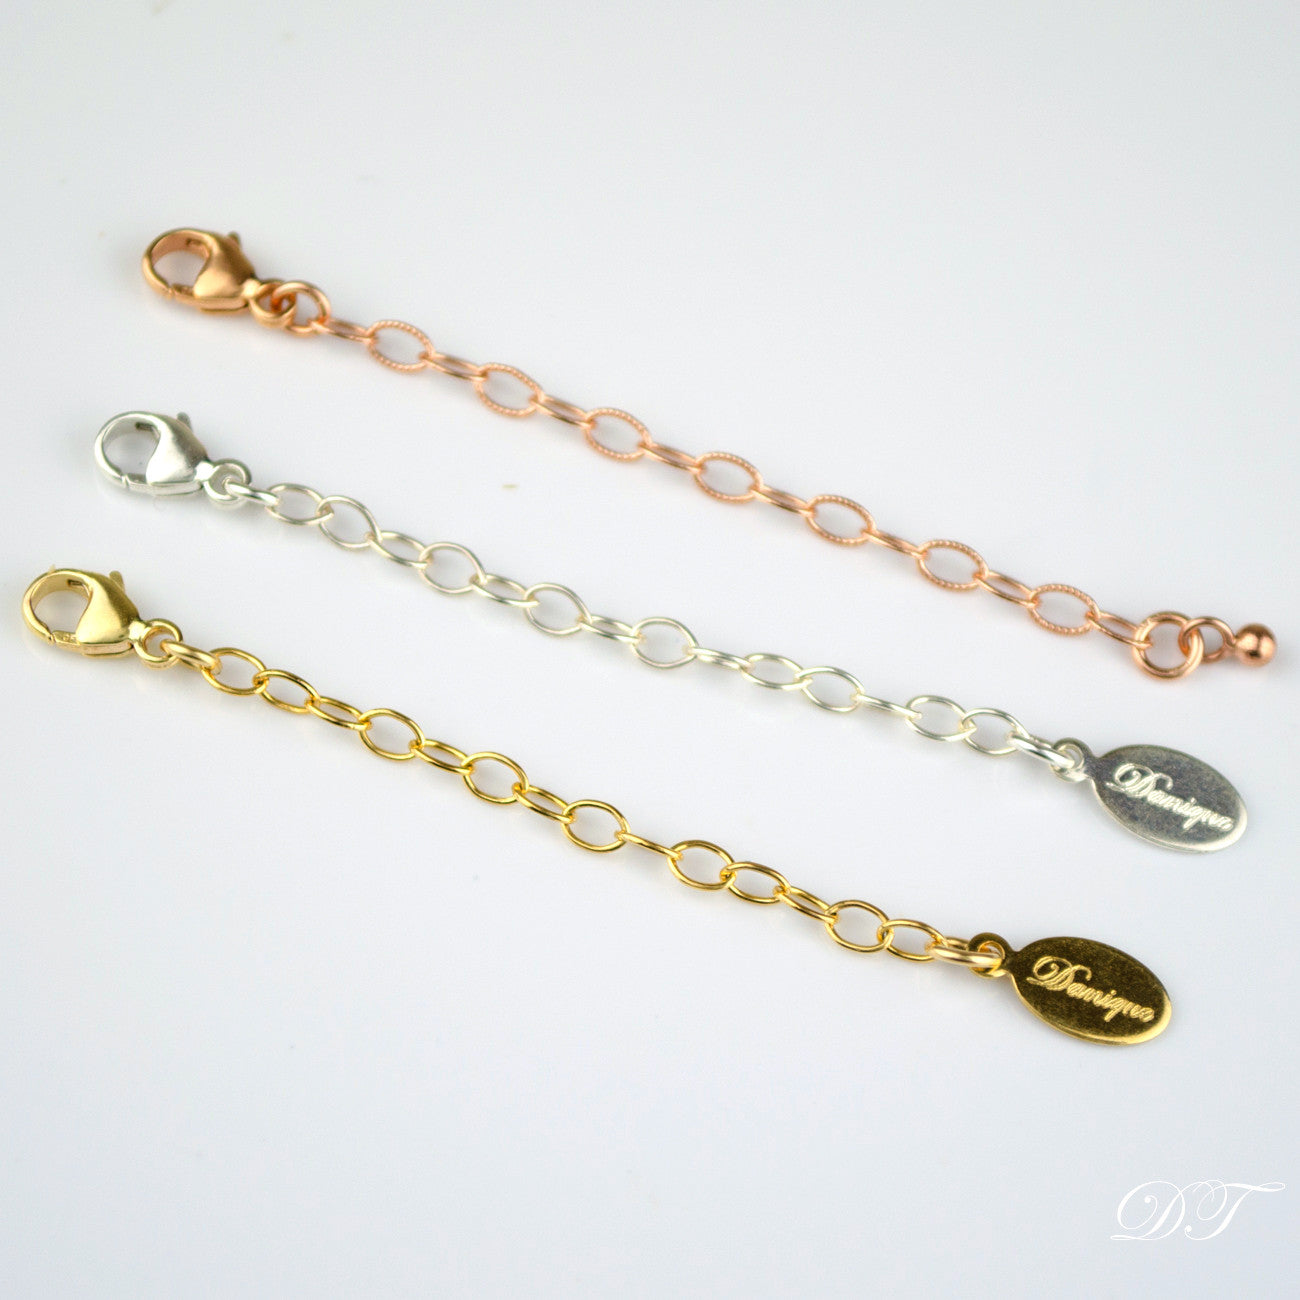 Necklace Extender - Any Length! - Danique Jewelry